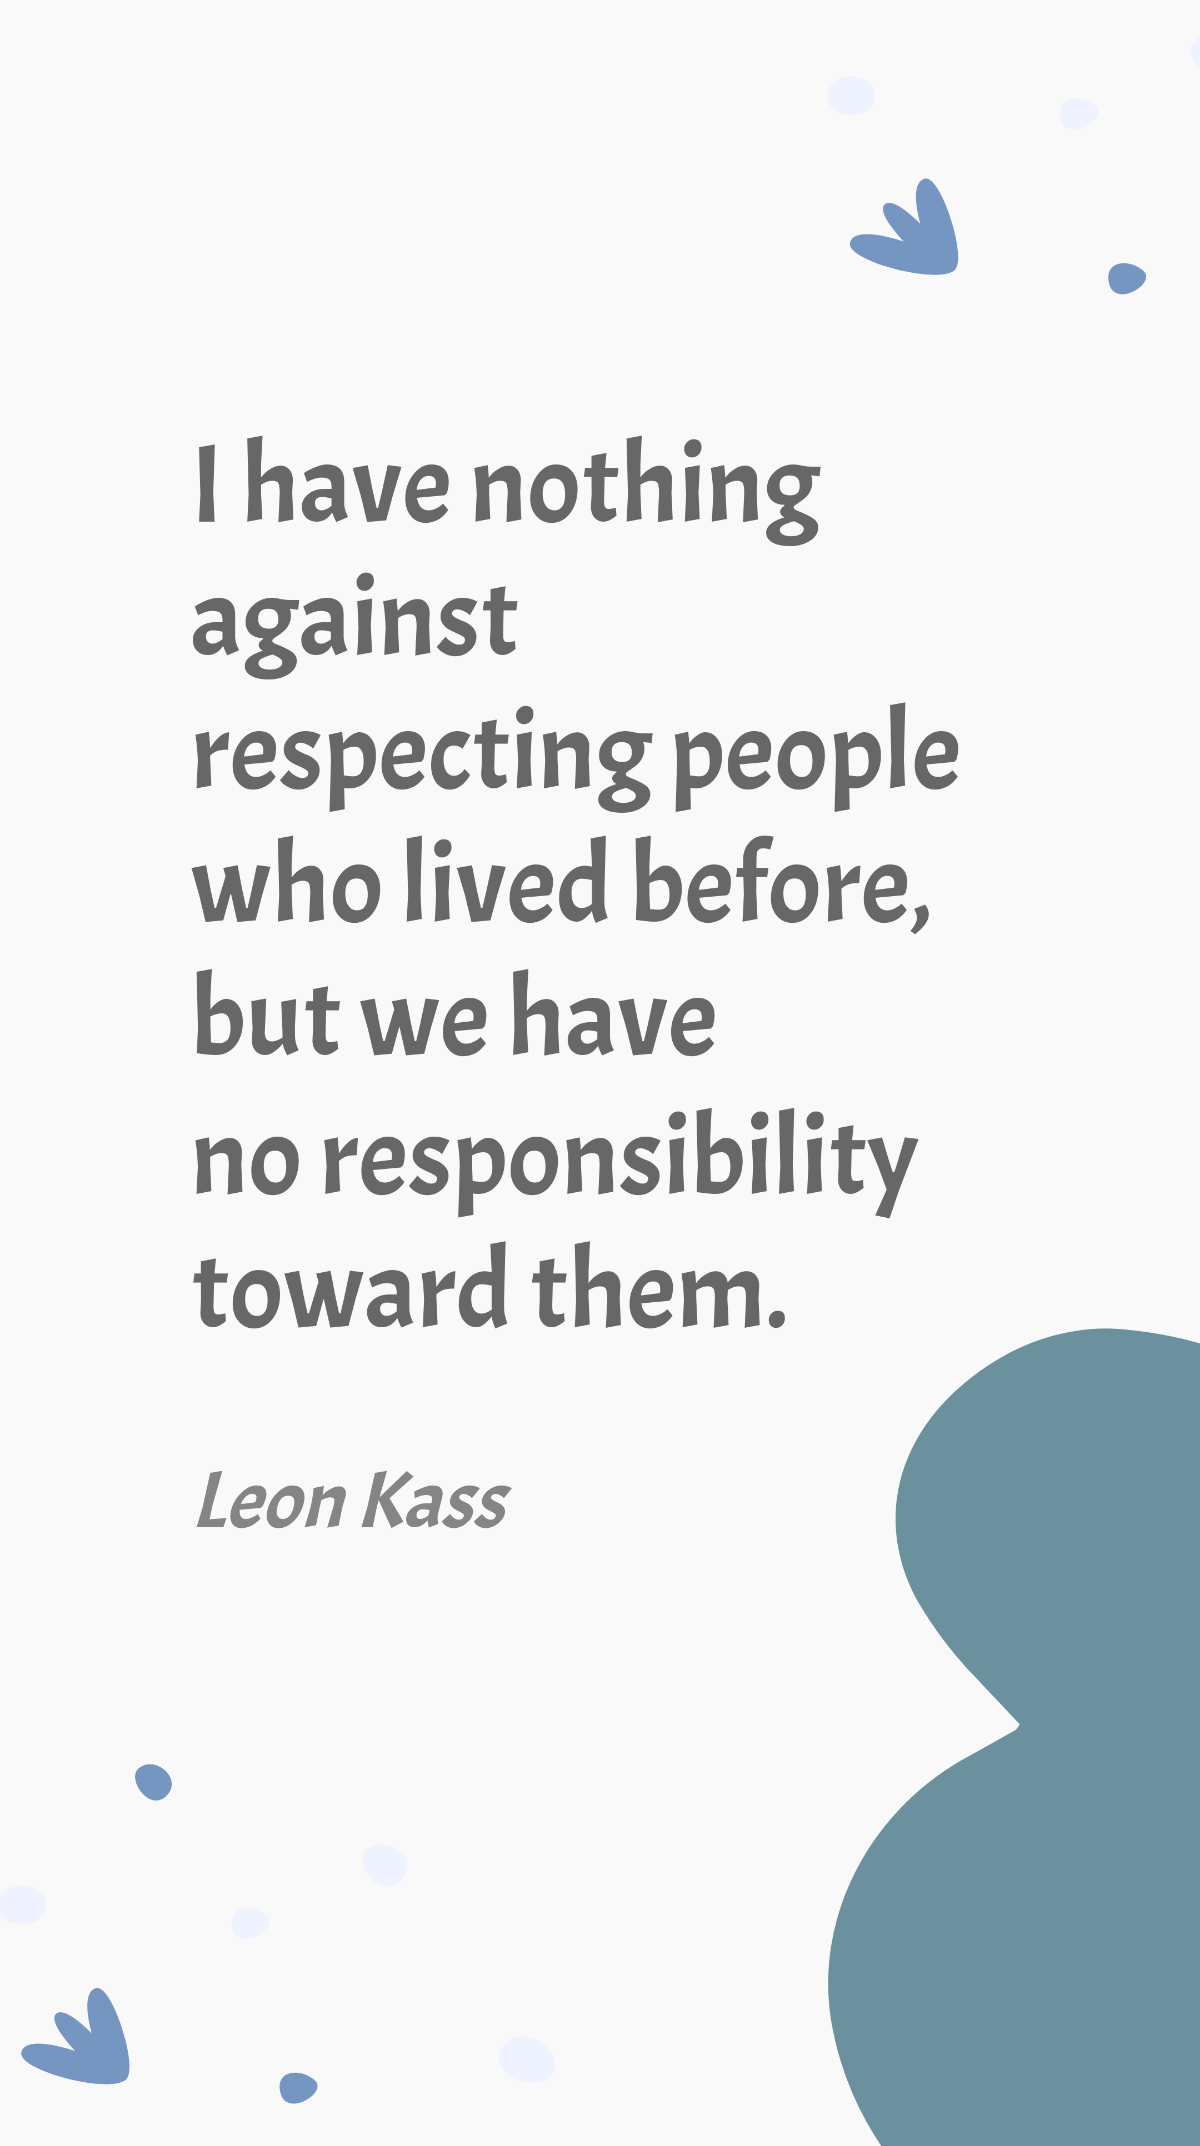 Leon Kass- I have nothing against respecting people who lived before, but we have no responsibility toward them. Template